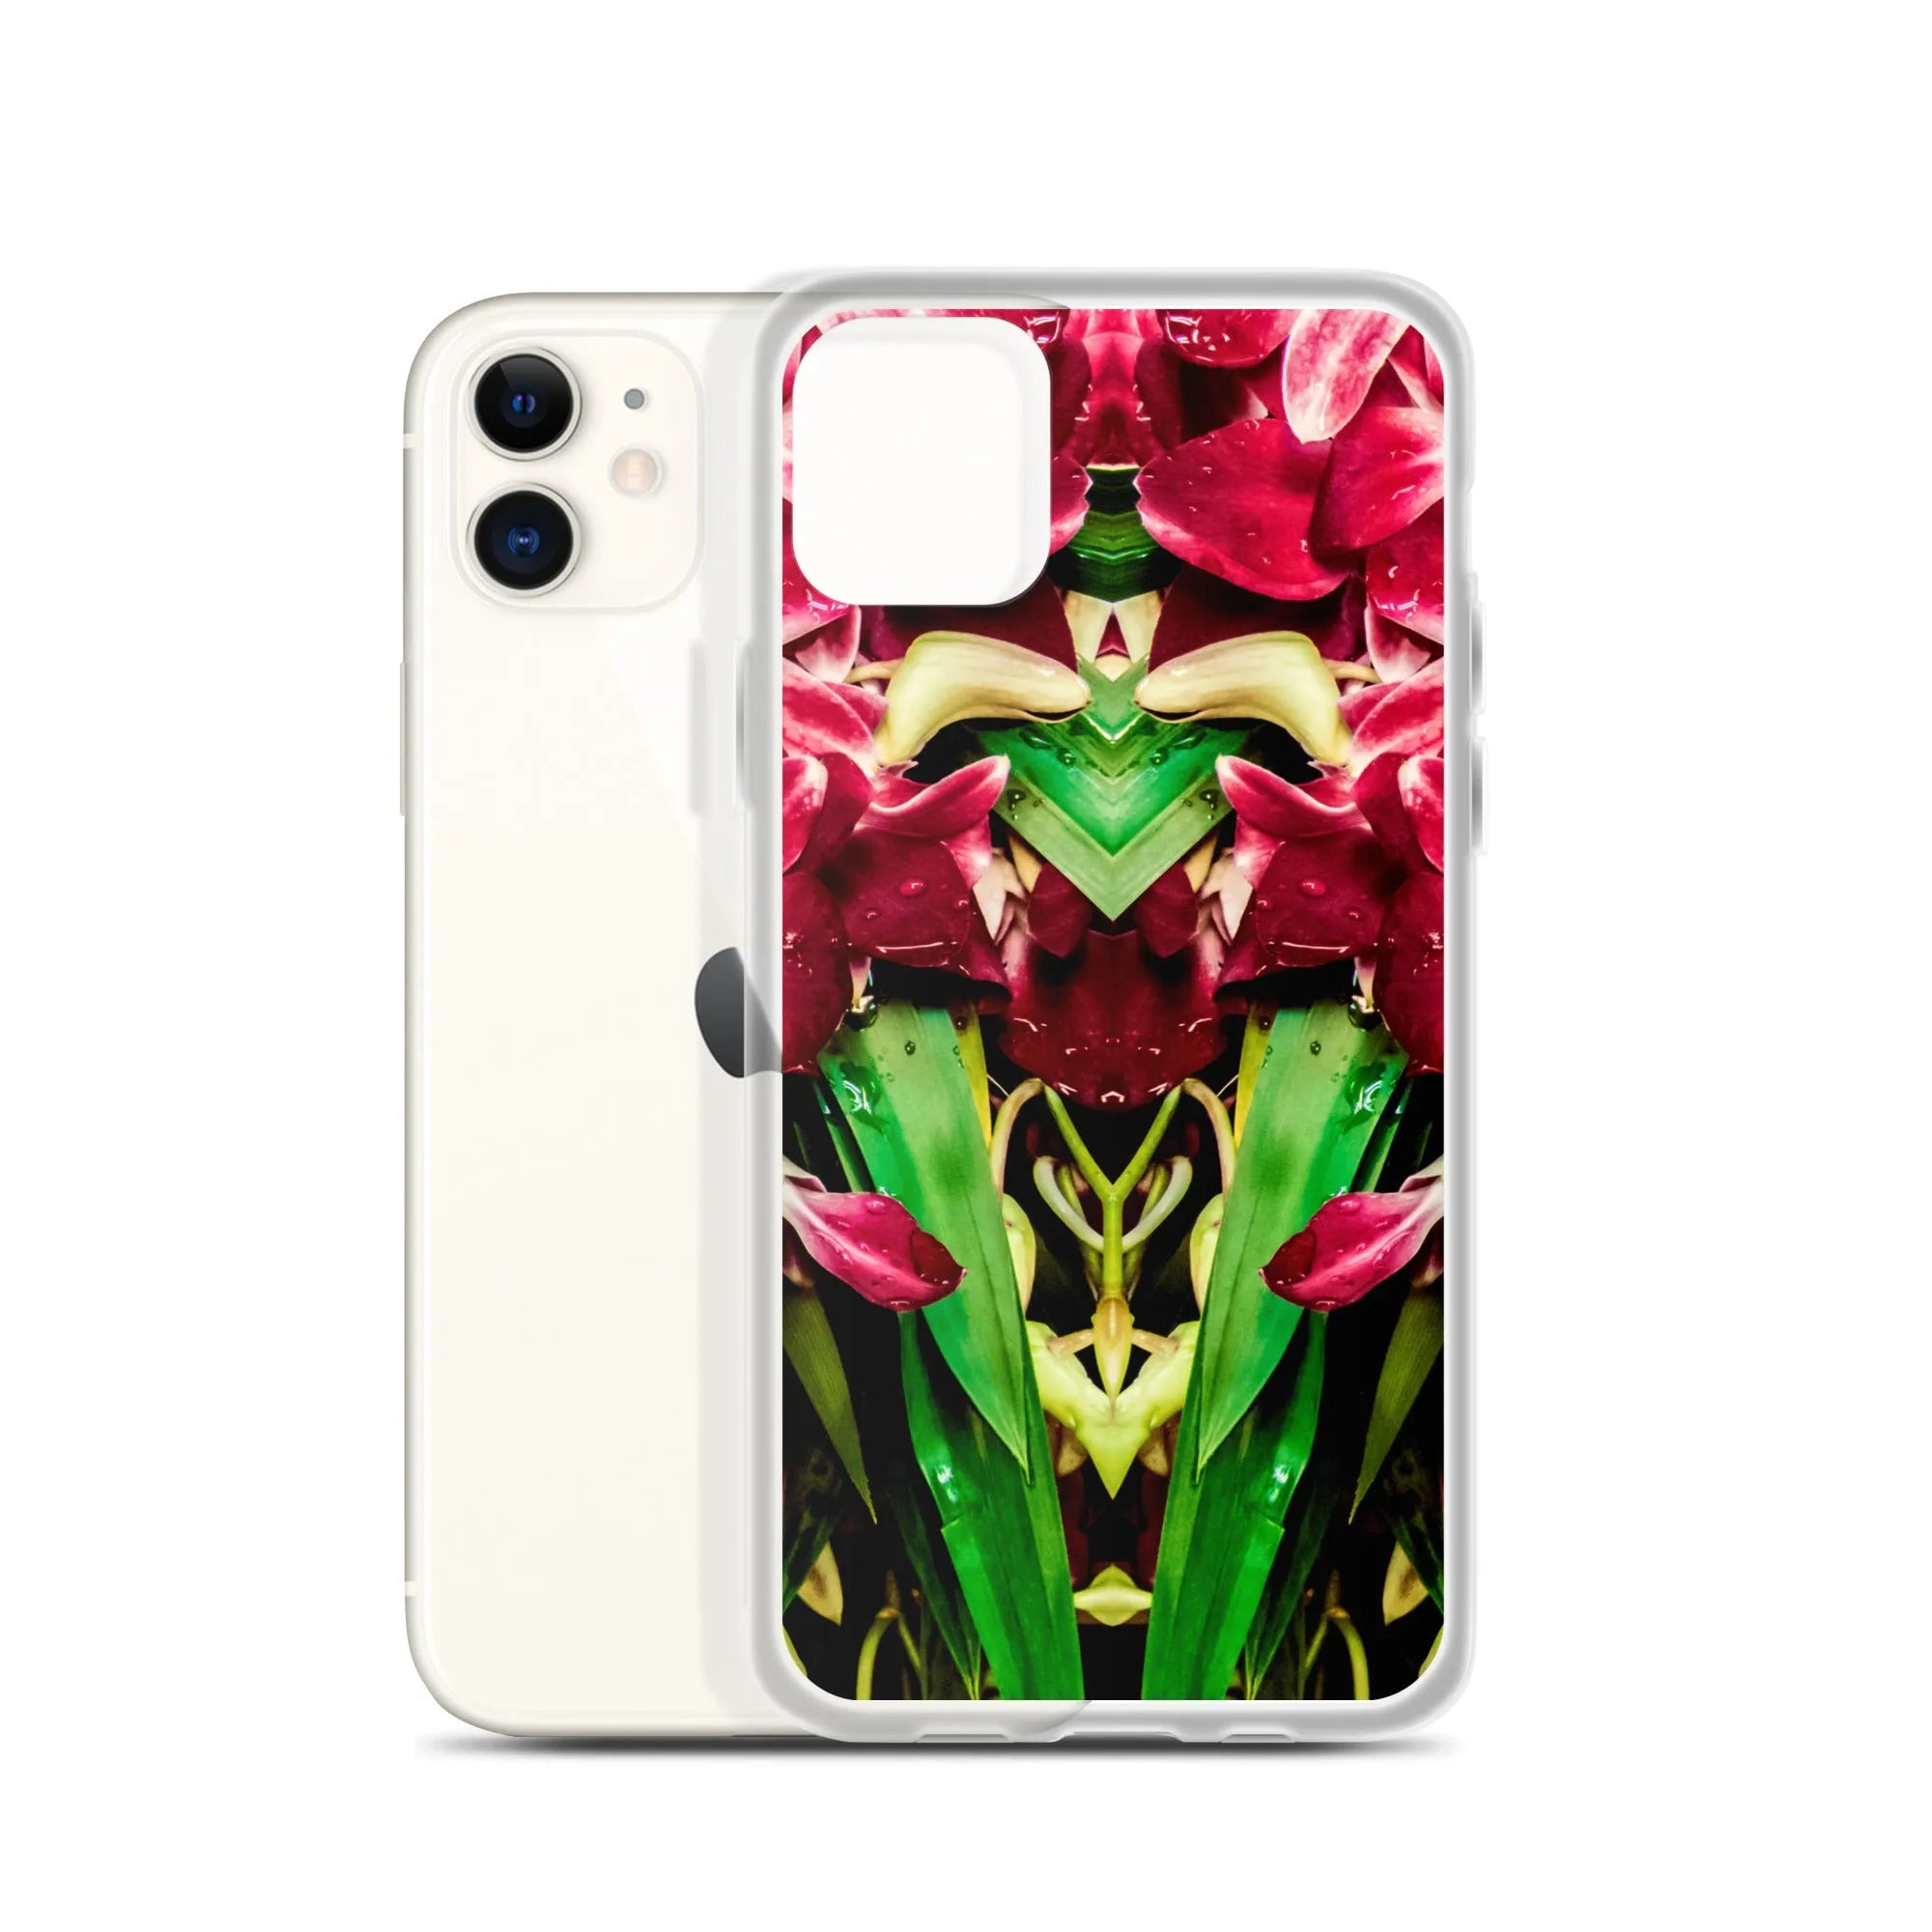 Ruby Reds² Floral Iphone Case - Iphone 11 - Mobile Phone Cases - Aesthetic Art